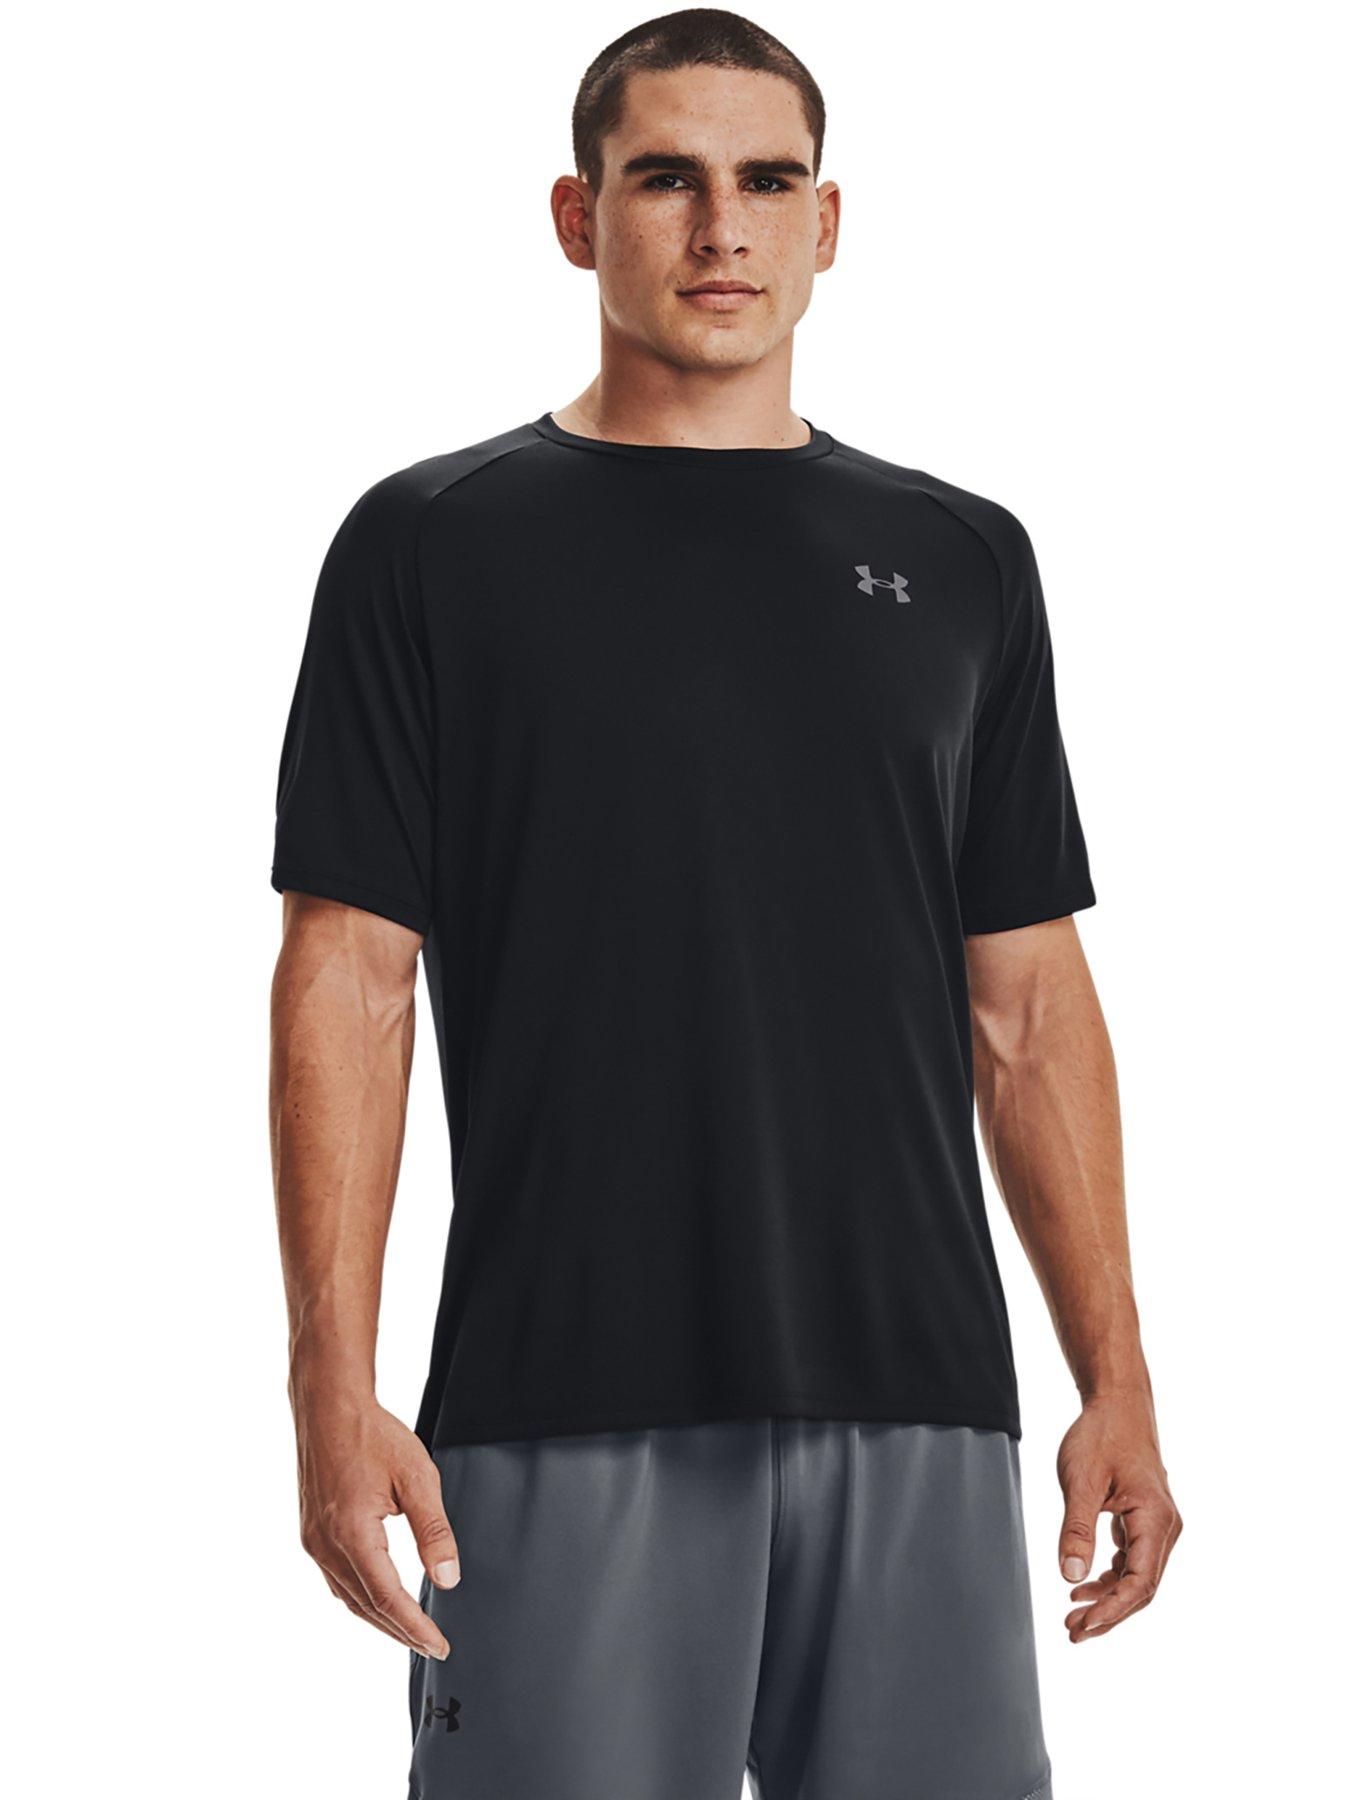 UNDER ARMOUR T-shirt CHALLENGER PRO with mesh in white/ gray